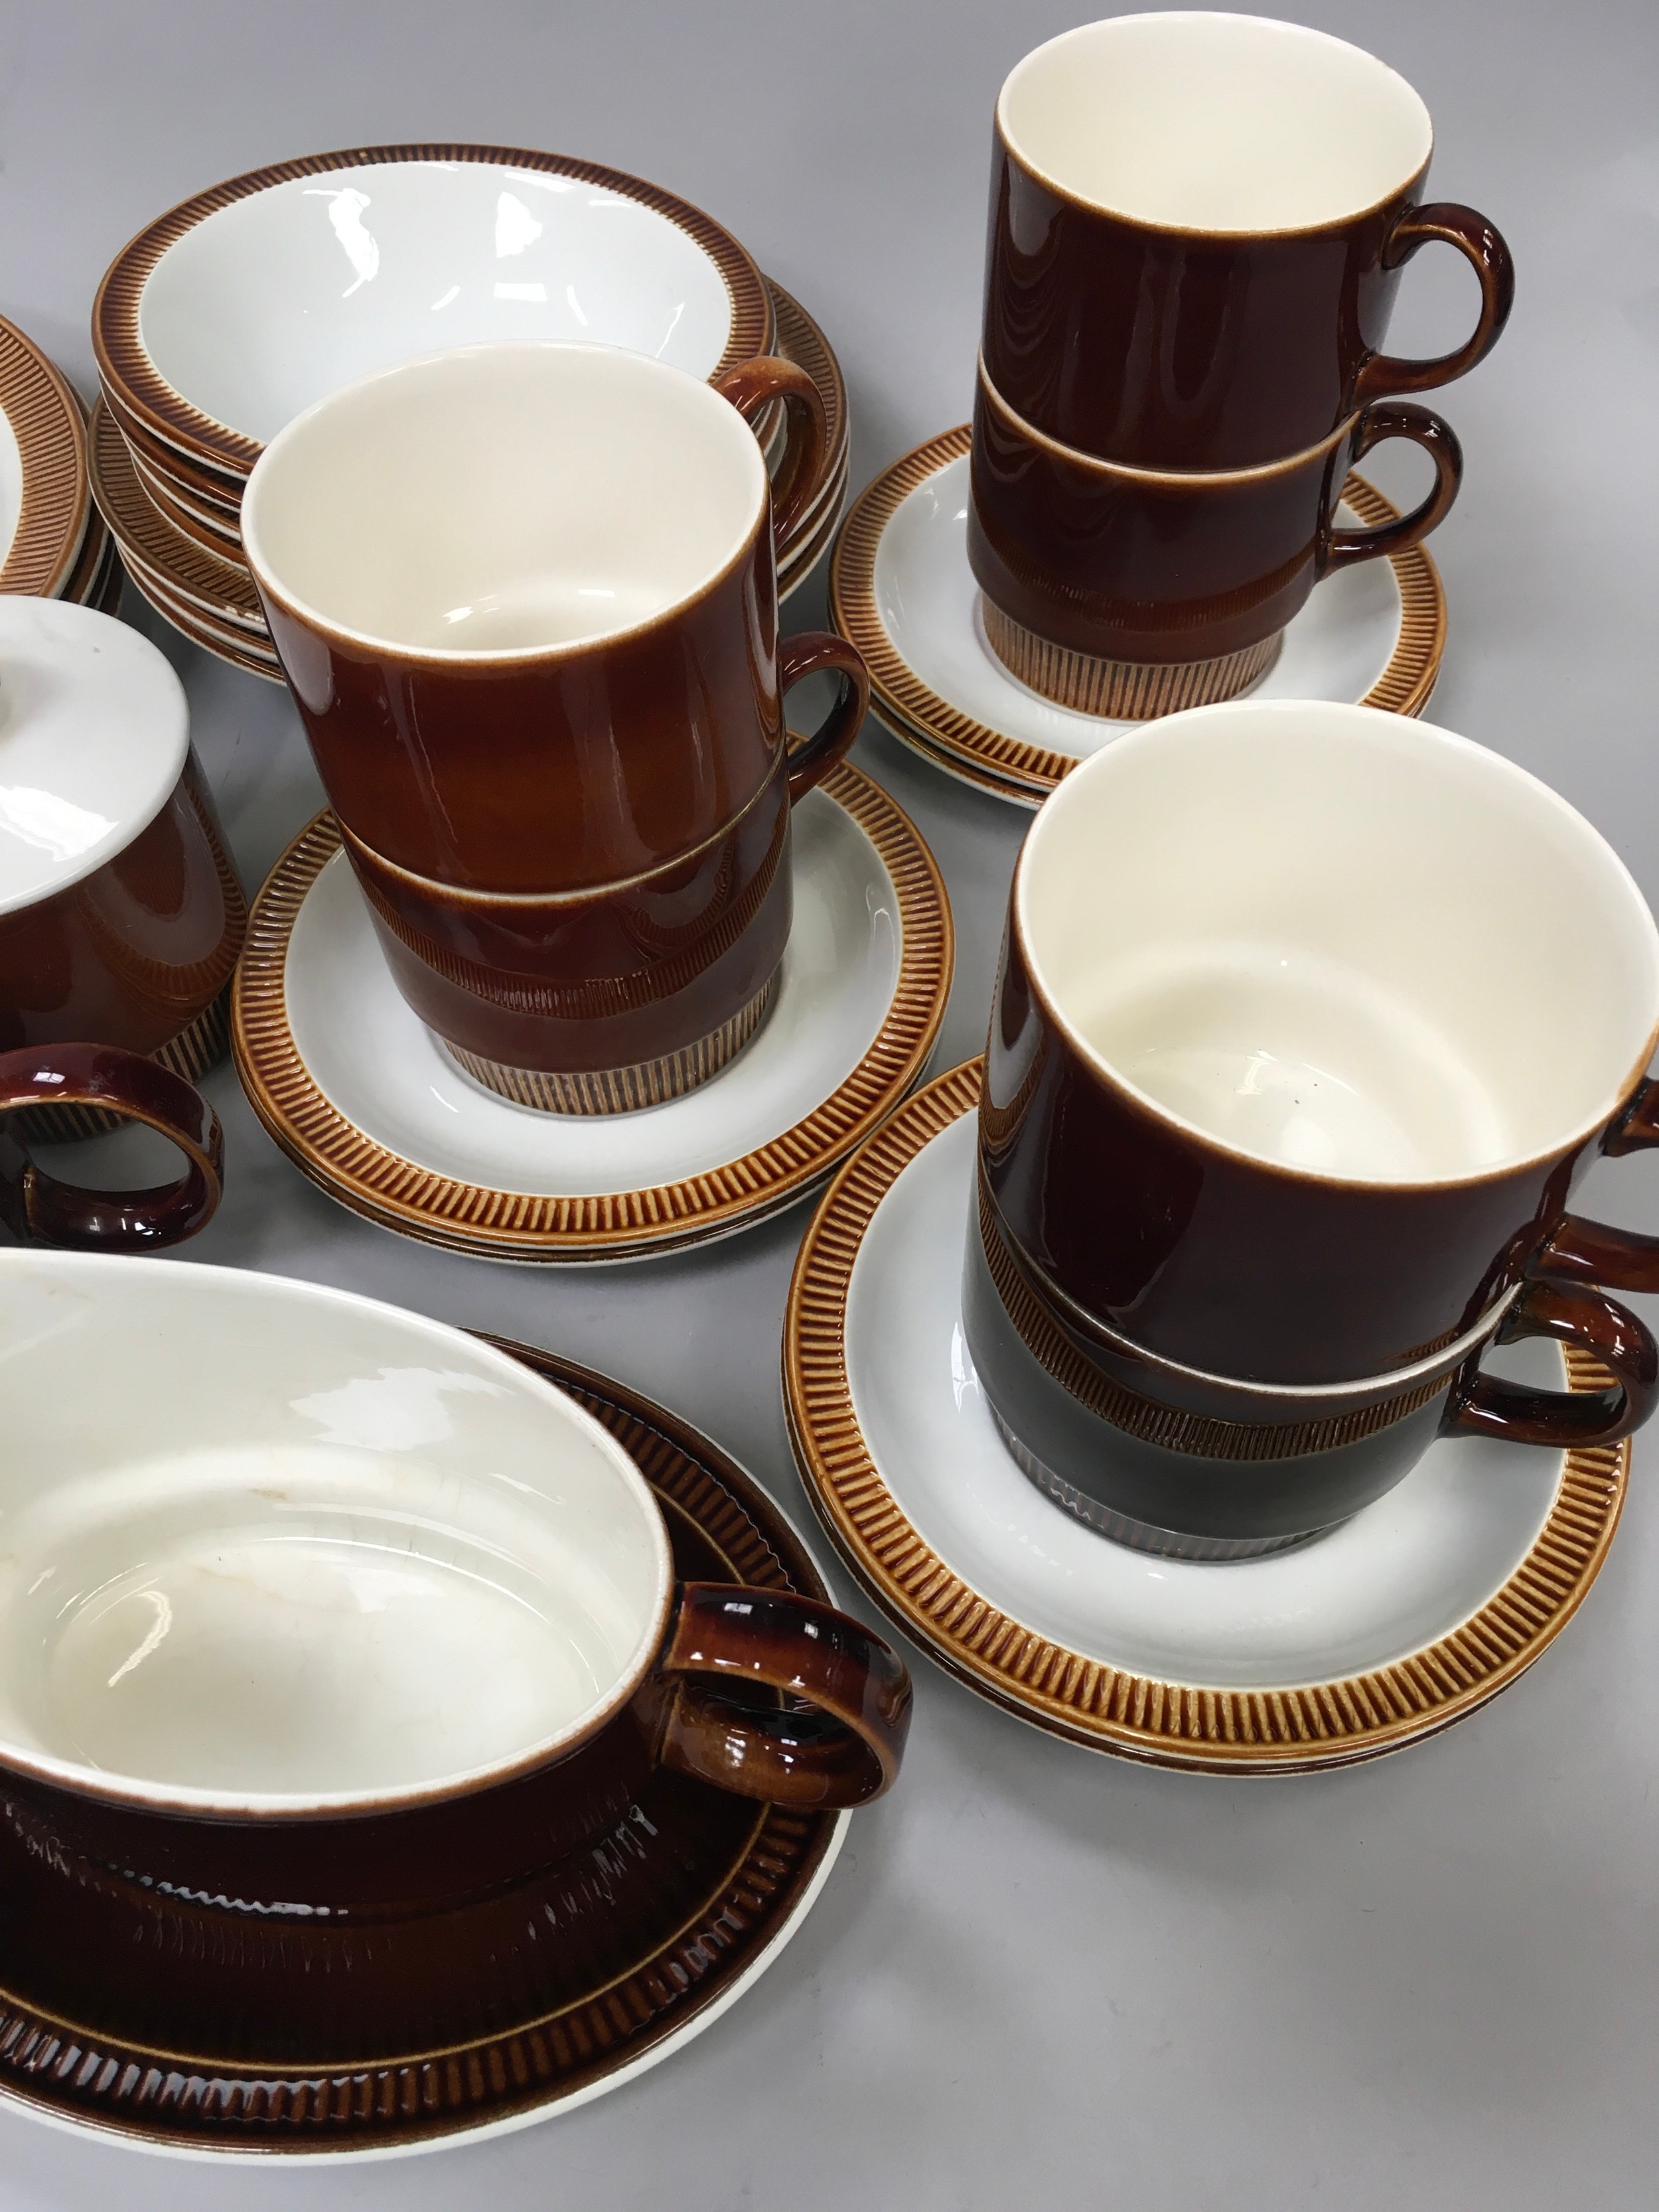 Poole pottery collection of ?Chestnut Brown? dinnerware approx 50 pieces. - Image 4 of 5